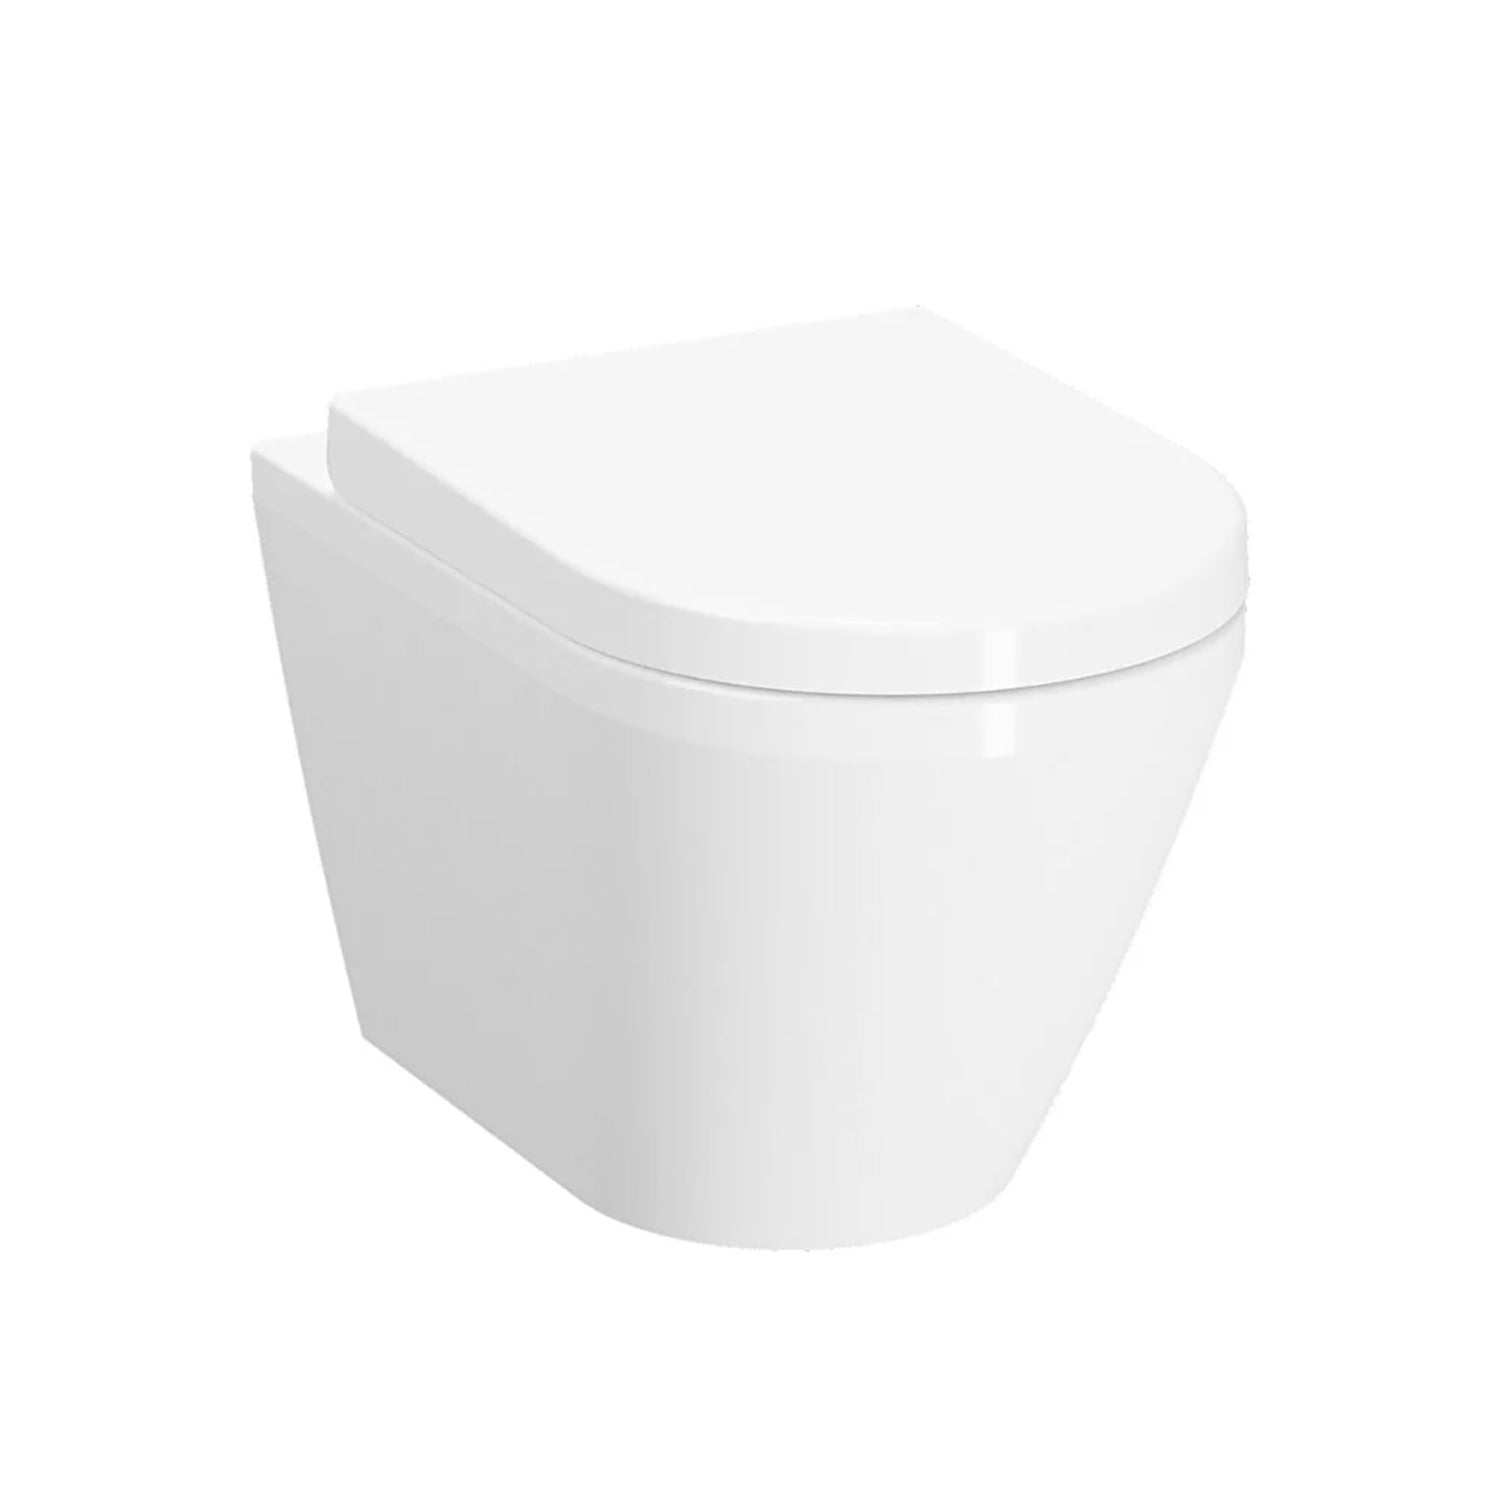 Vesta wall hung toilet in a white finish, 520mm with seat and cover included on a white background.